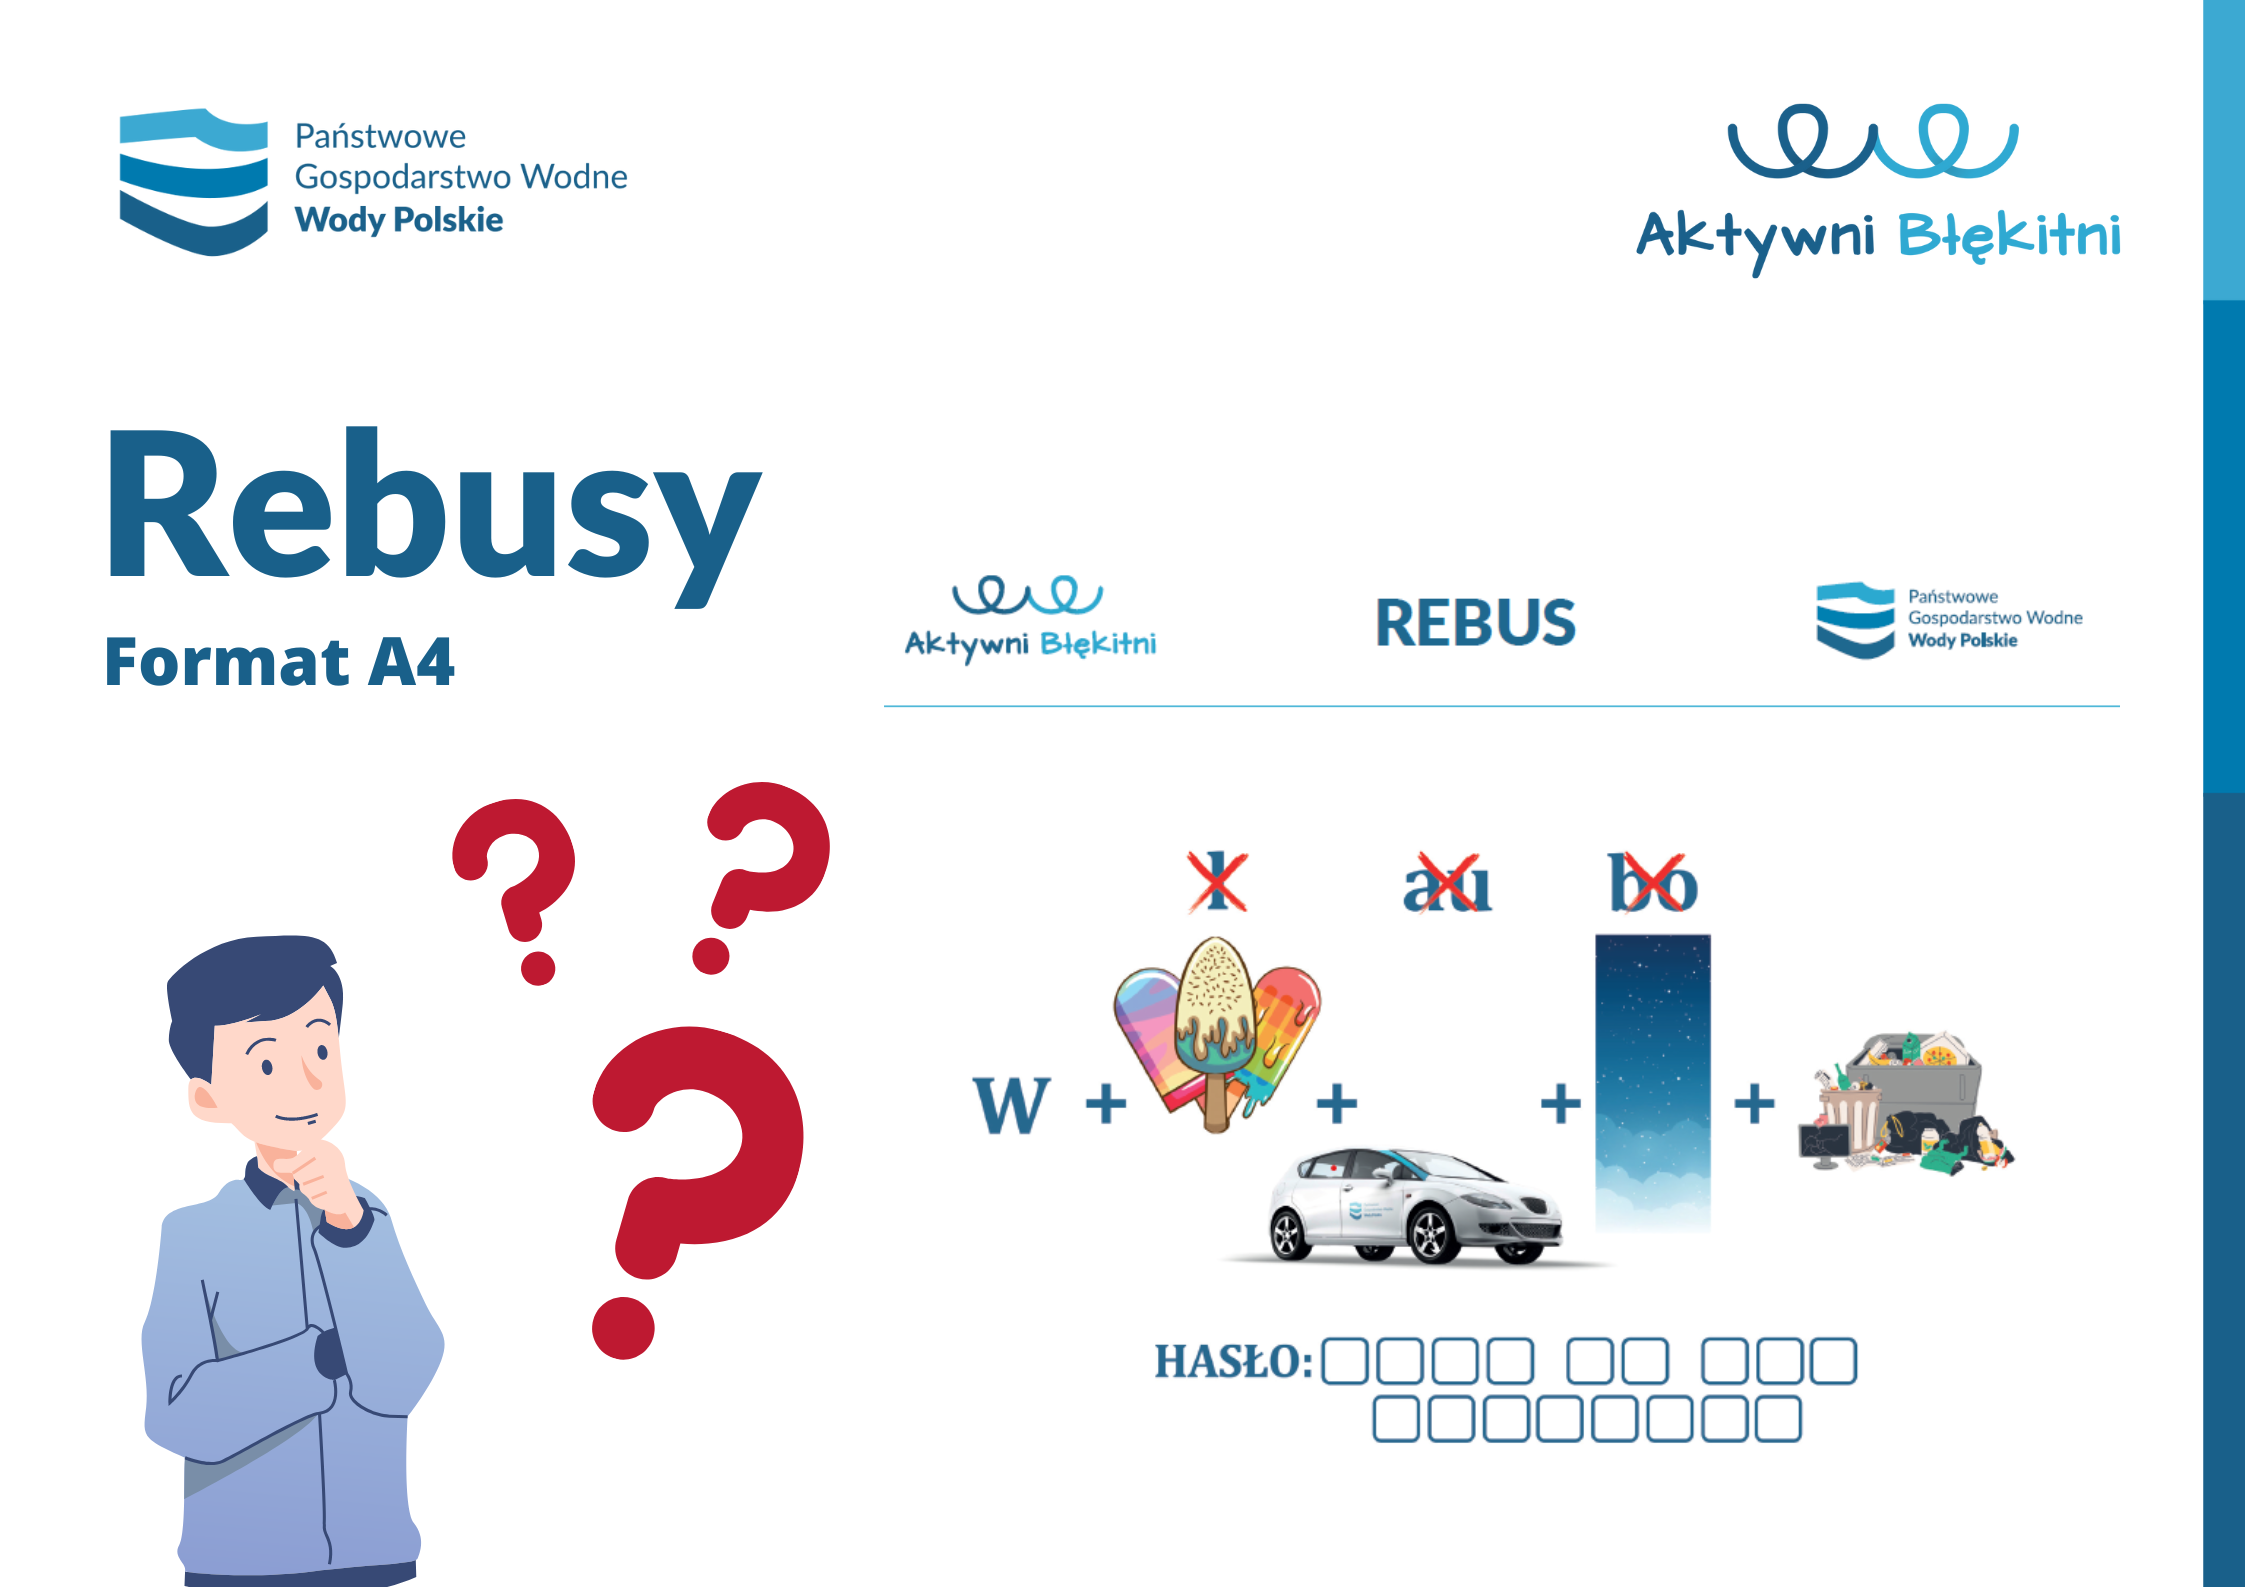 Rebusy - format A4